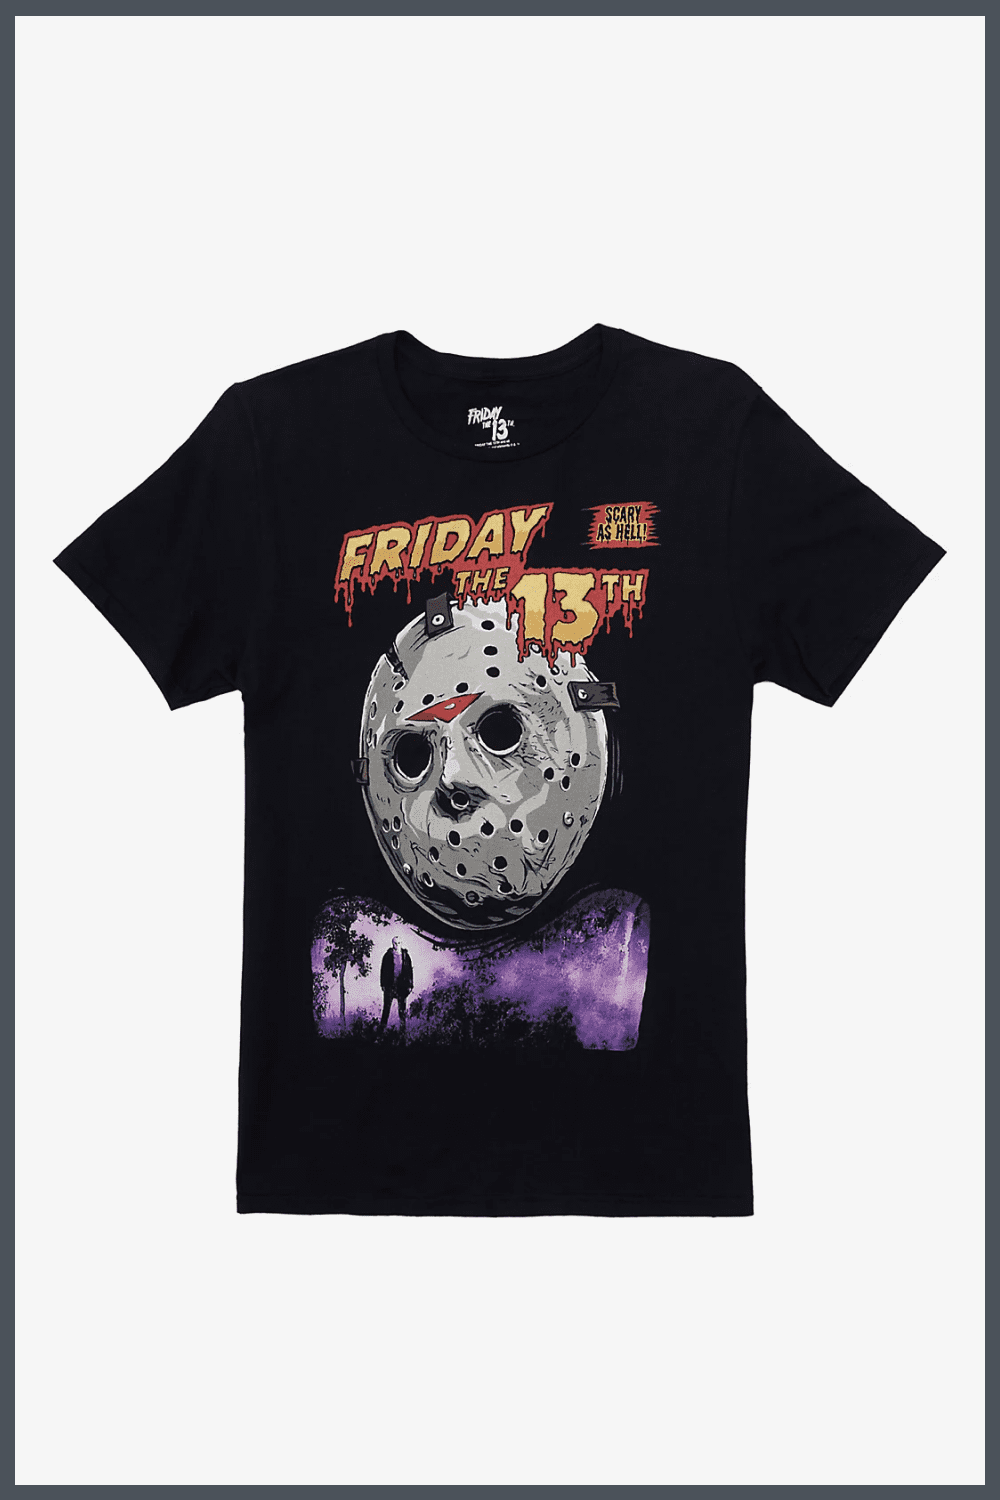 Mask T-shirt from the horror movie Saw.